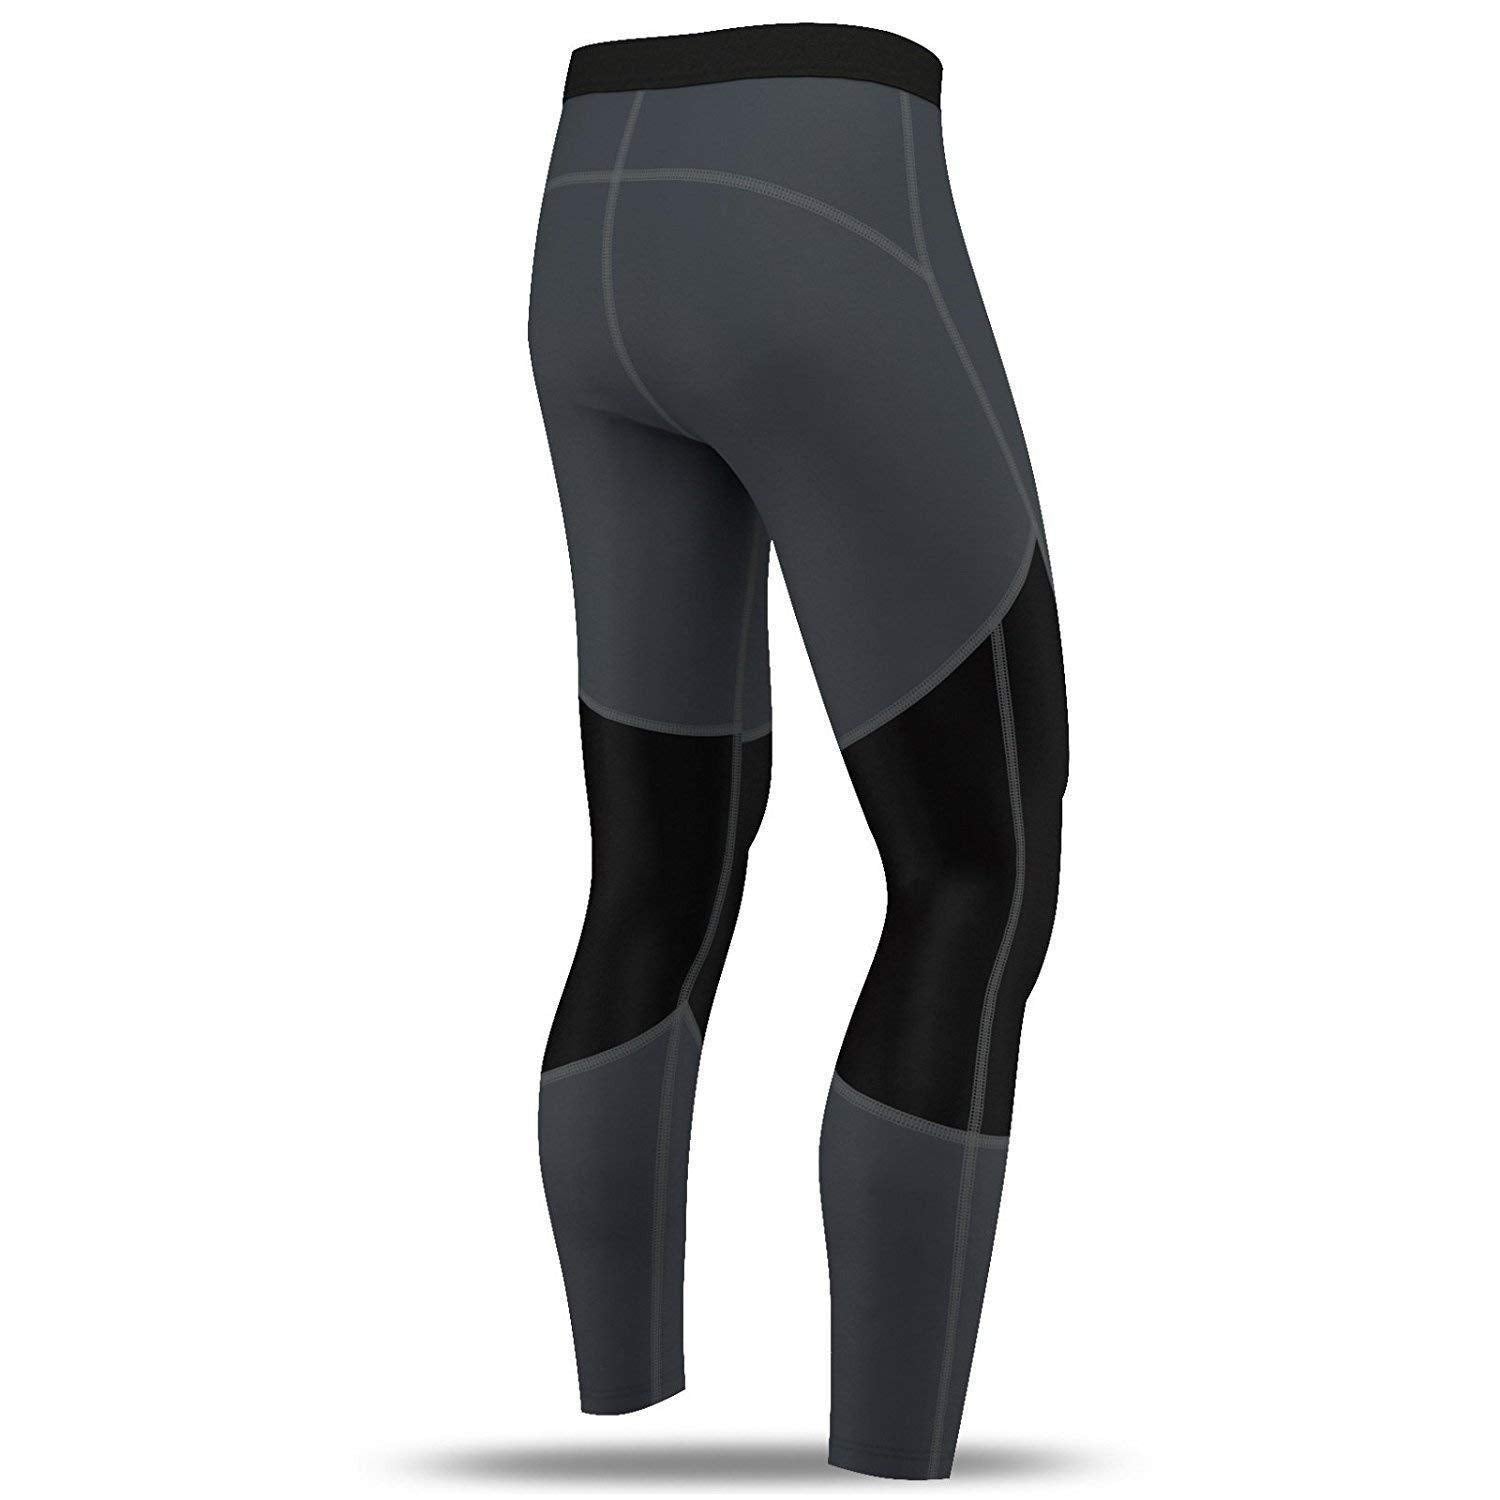 DiDOO Men's Thermal Compression Base Layer Leggings